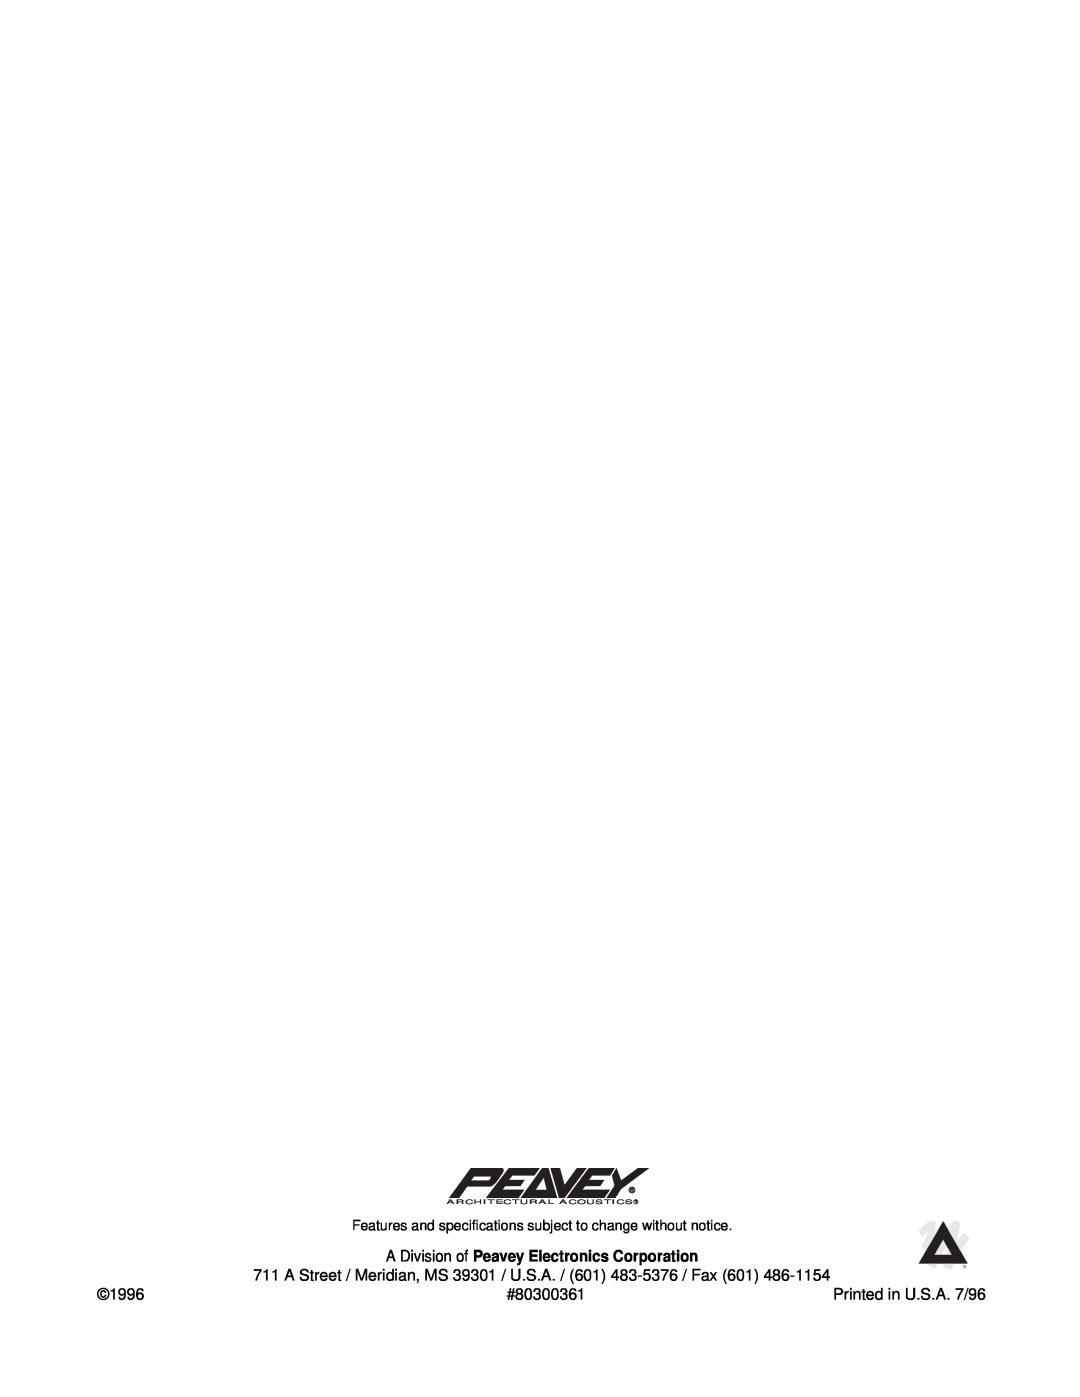 Peavey 646-049 manual A Division of Peavey Electronics Corporation, #80300361, 1996, Architectural Acoustics 